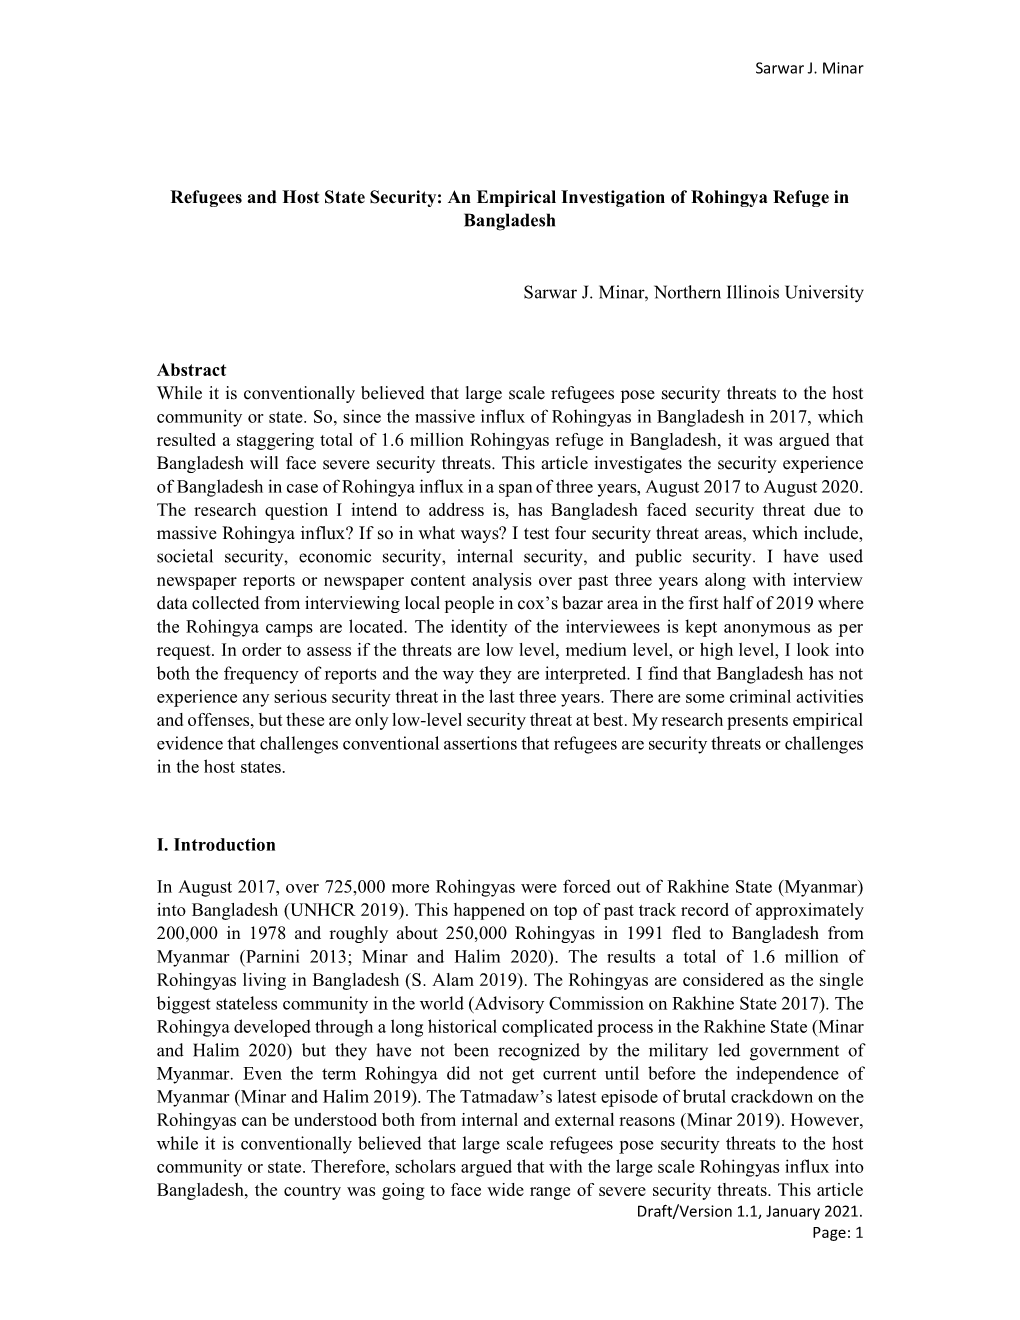 Refugees and Host State Security: an Empirical Investigation of Rohingya Refuge in Bangladesh